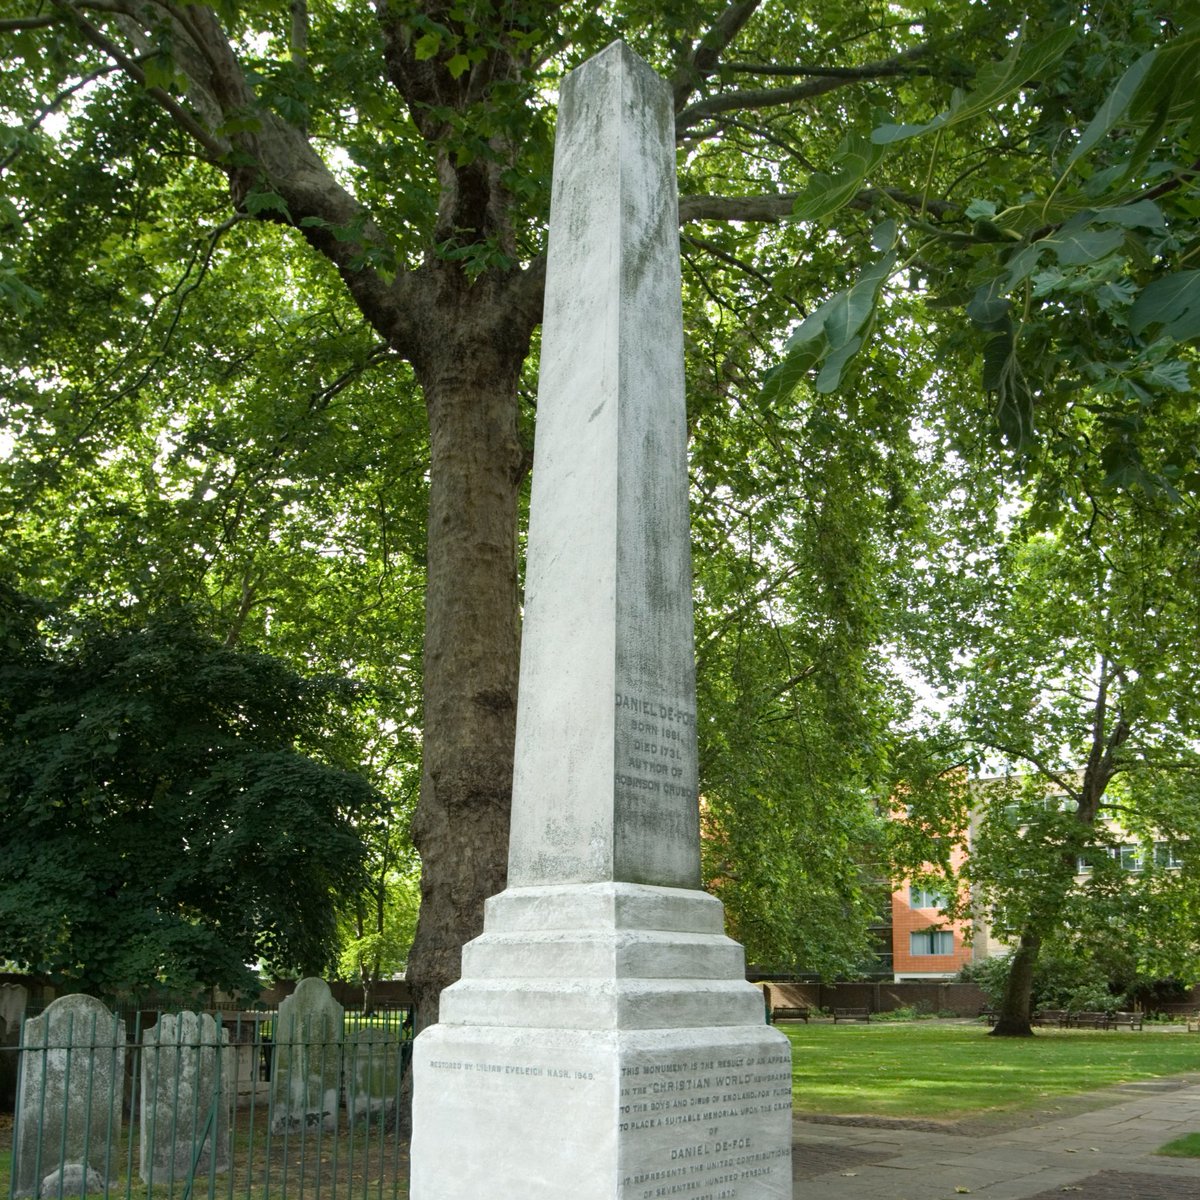 The memorial of Daniel Defoe at Bunhill Fields #London

#otd in 1719, Defoe's 'Robinson Crusoe' first appeared; a novel which may loosely be based on the real life castaway story of privateer Alexander Selkirk who was marooned for 4 yrs on a Pacific island.

Defoe himself 🧵